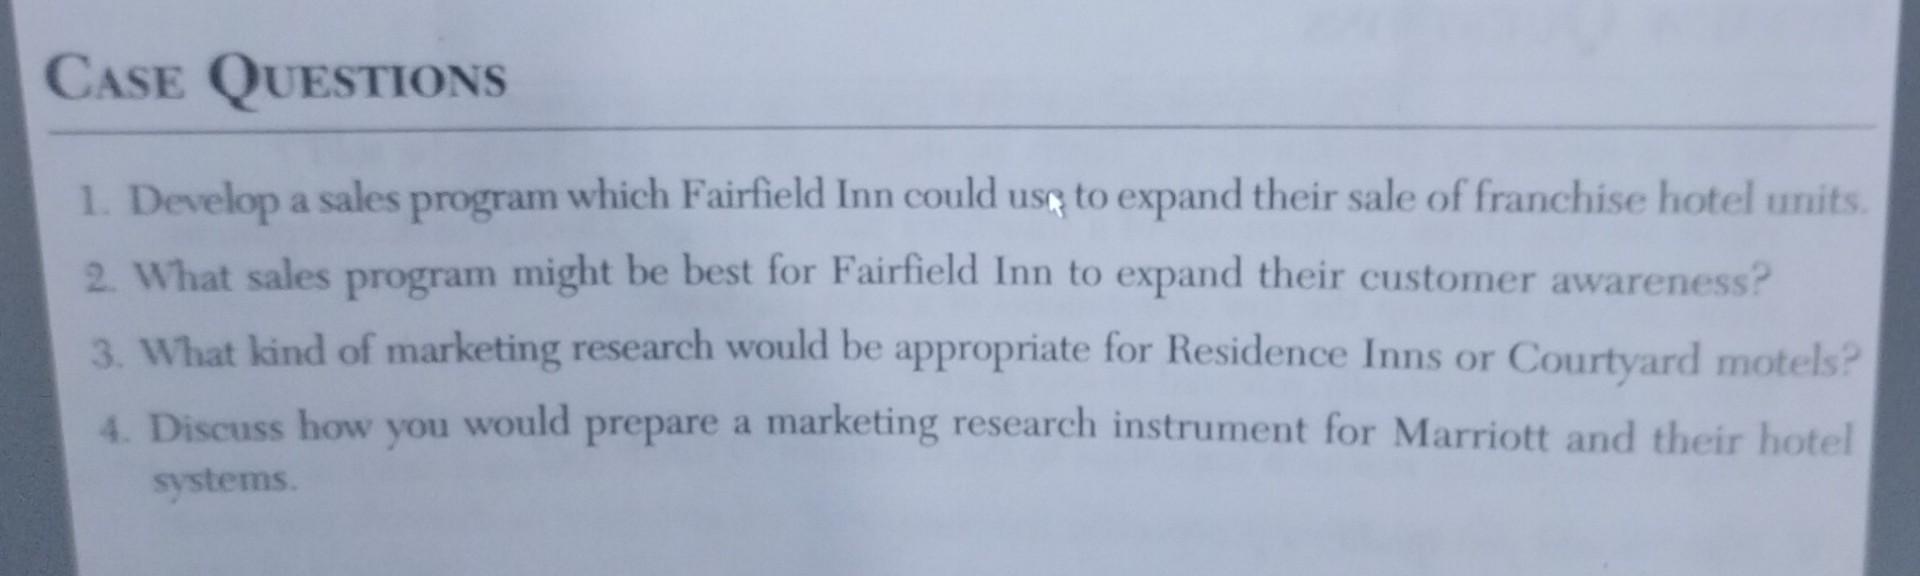 CASE QUESTIONS 1. Develop a sales program which Fairfield Inn could use to expand their sale of franchise